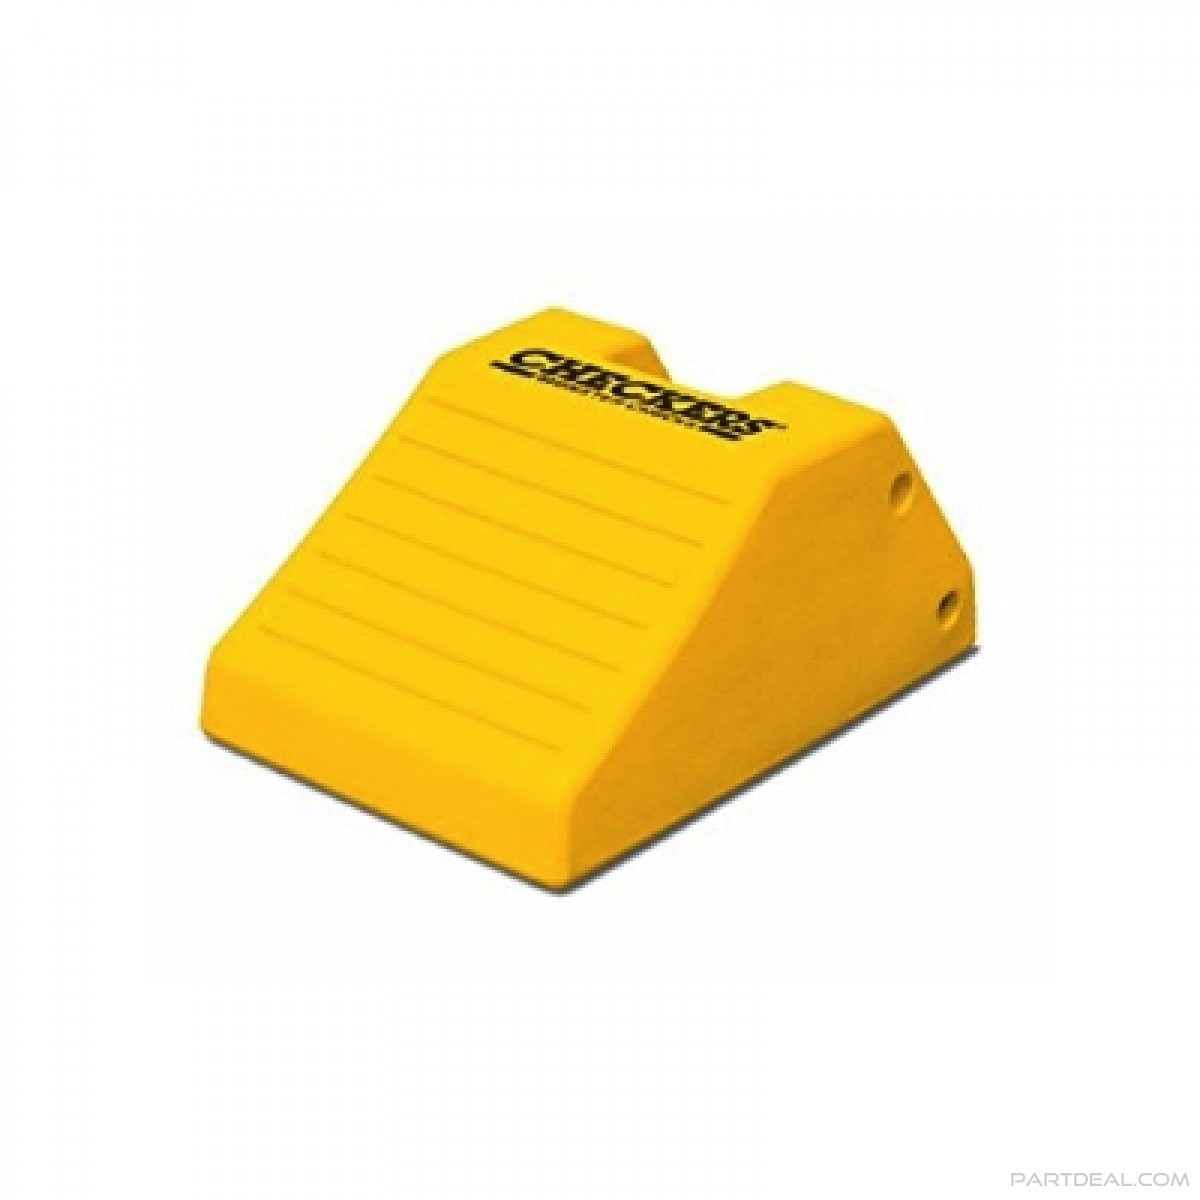 Checkers Monster Heavy Duty Off Road Urethane Wheel Chock Mc1912 pertaining to dimensions 1200 X 1200